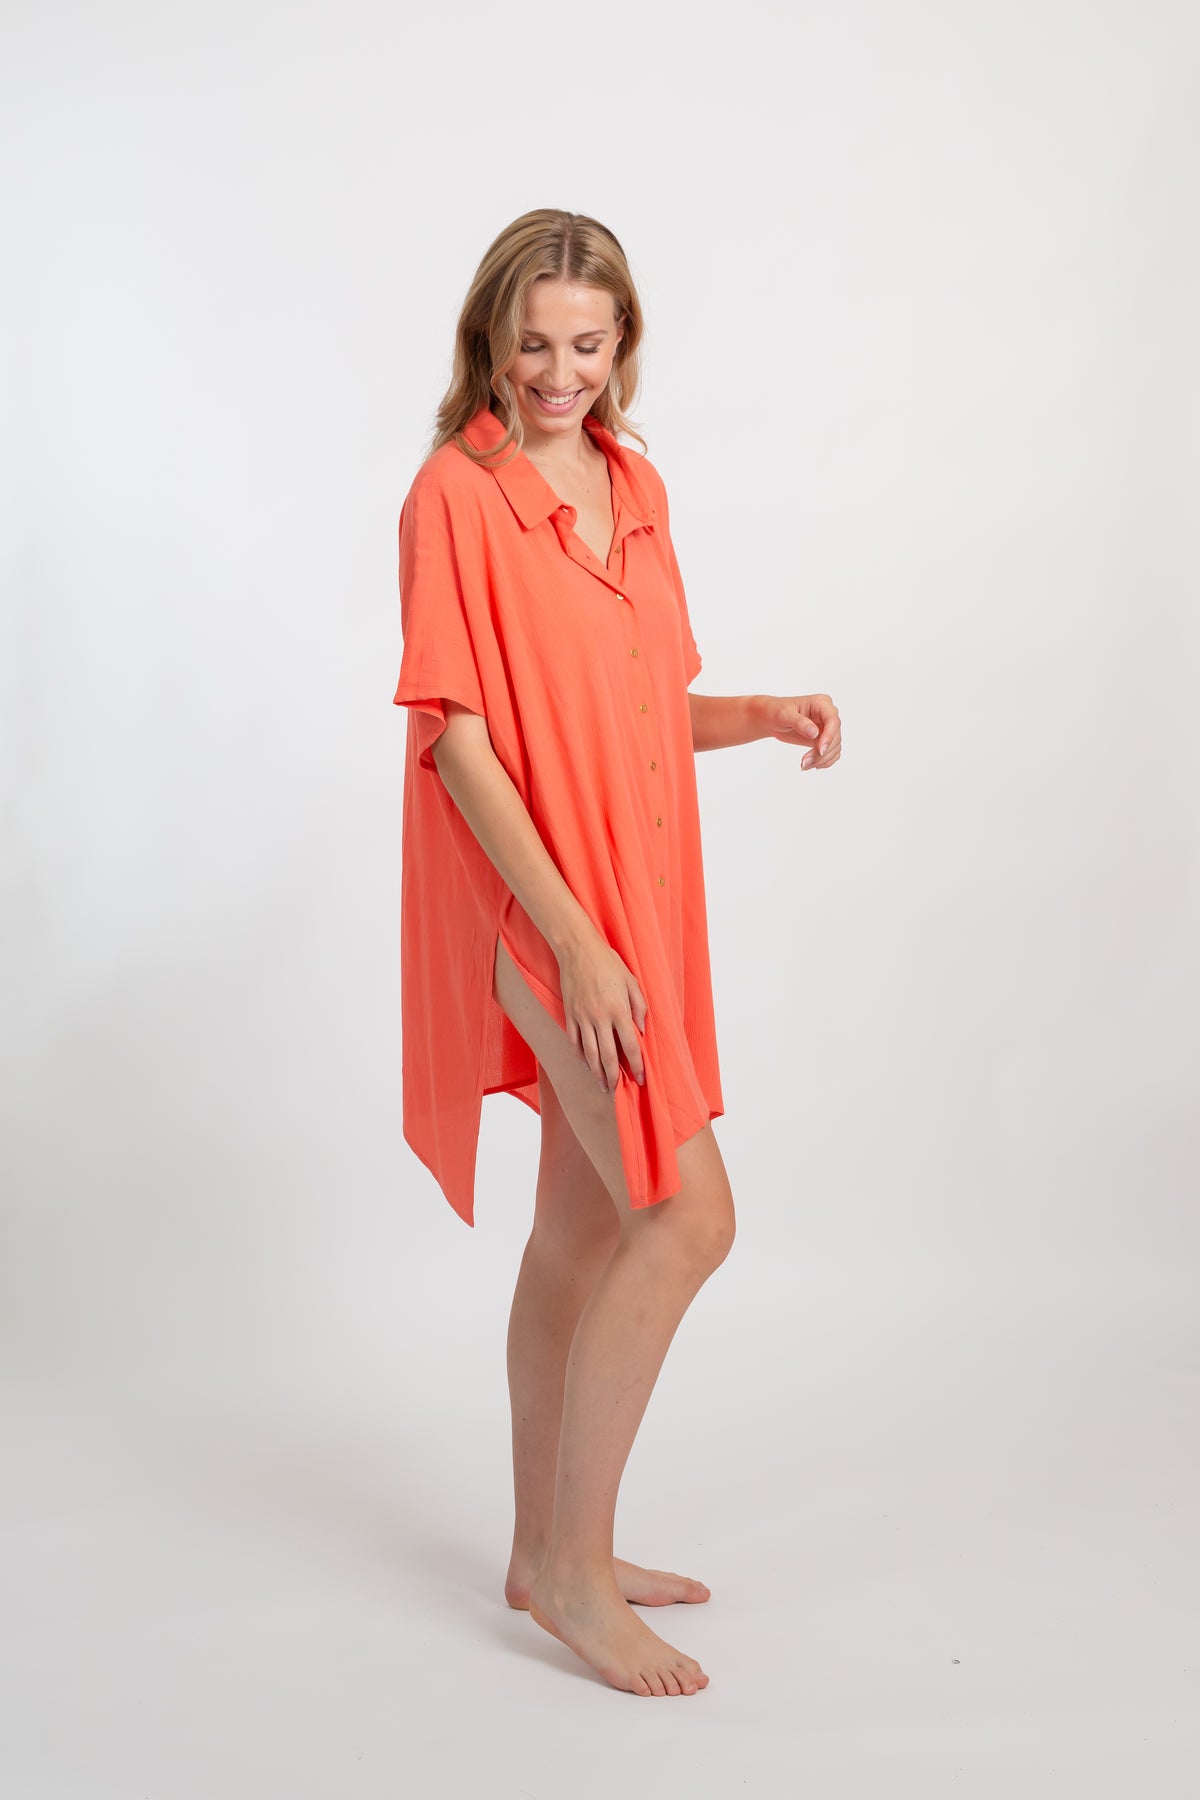 A blonde Caucasian model wearing a orange coral colored in "punch" big shirt bathing suit cover up shirt dress, standing in a studio, smiling and laughing. 